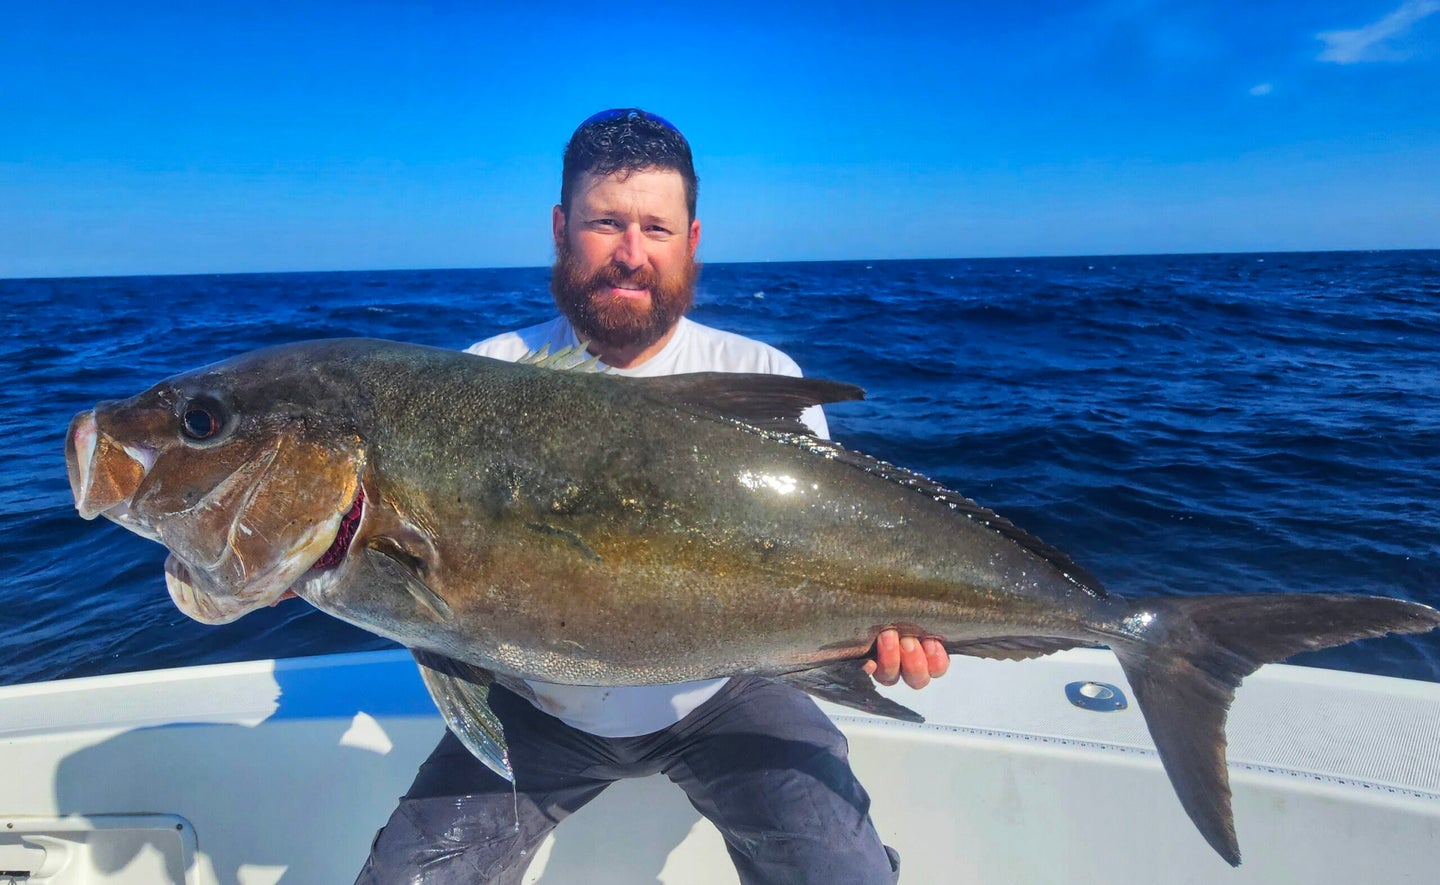 A Massachusetts fisherman poses with a North Carolina state record Almaco jack.